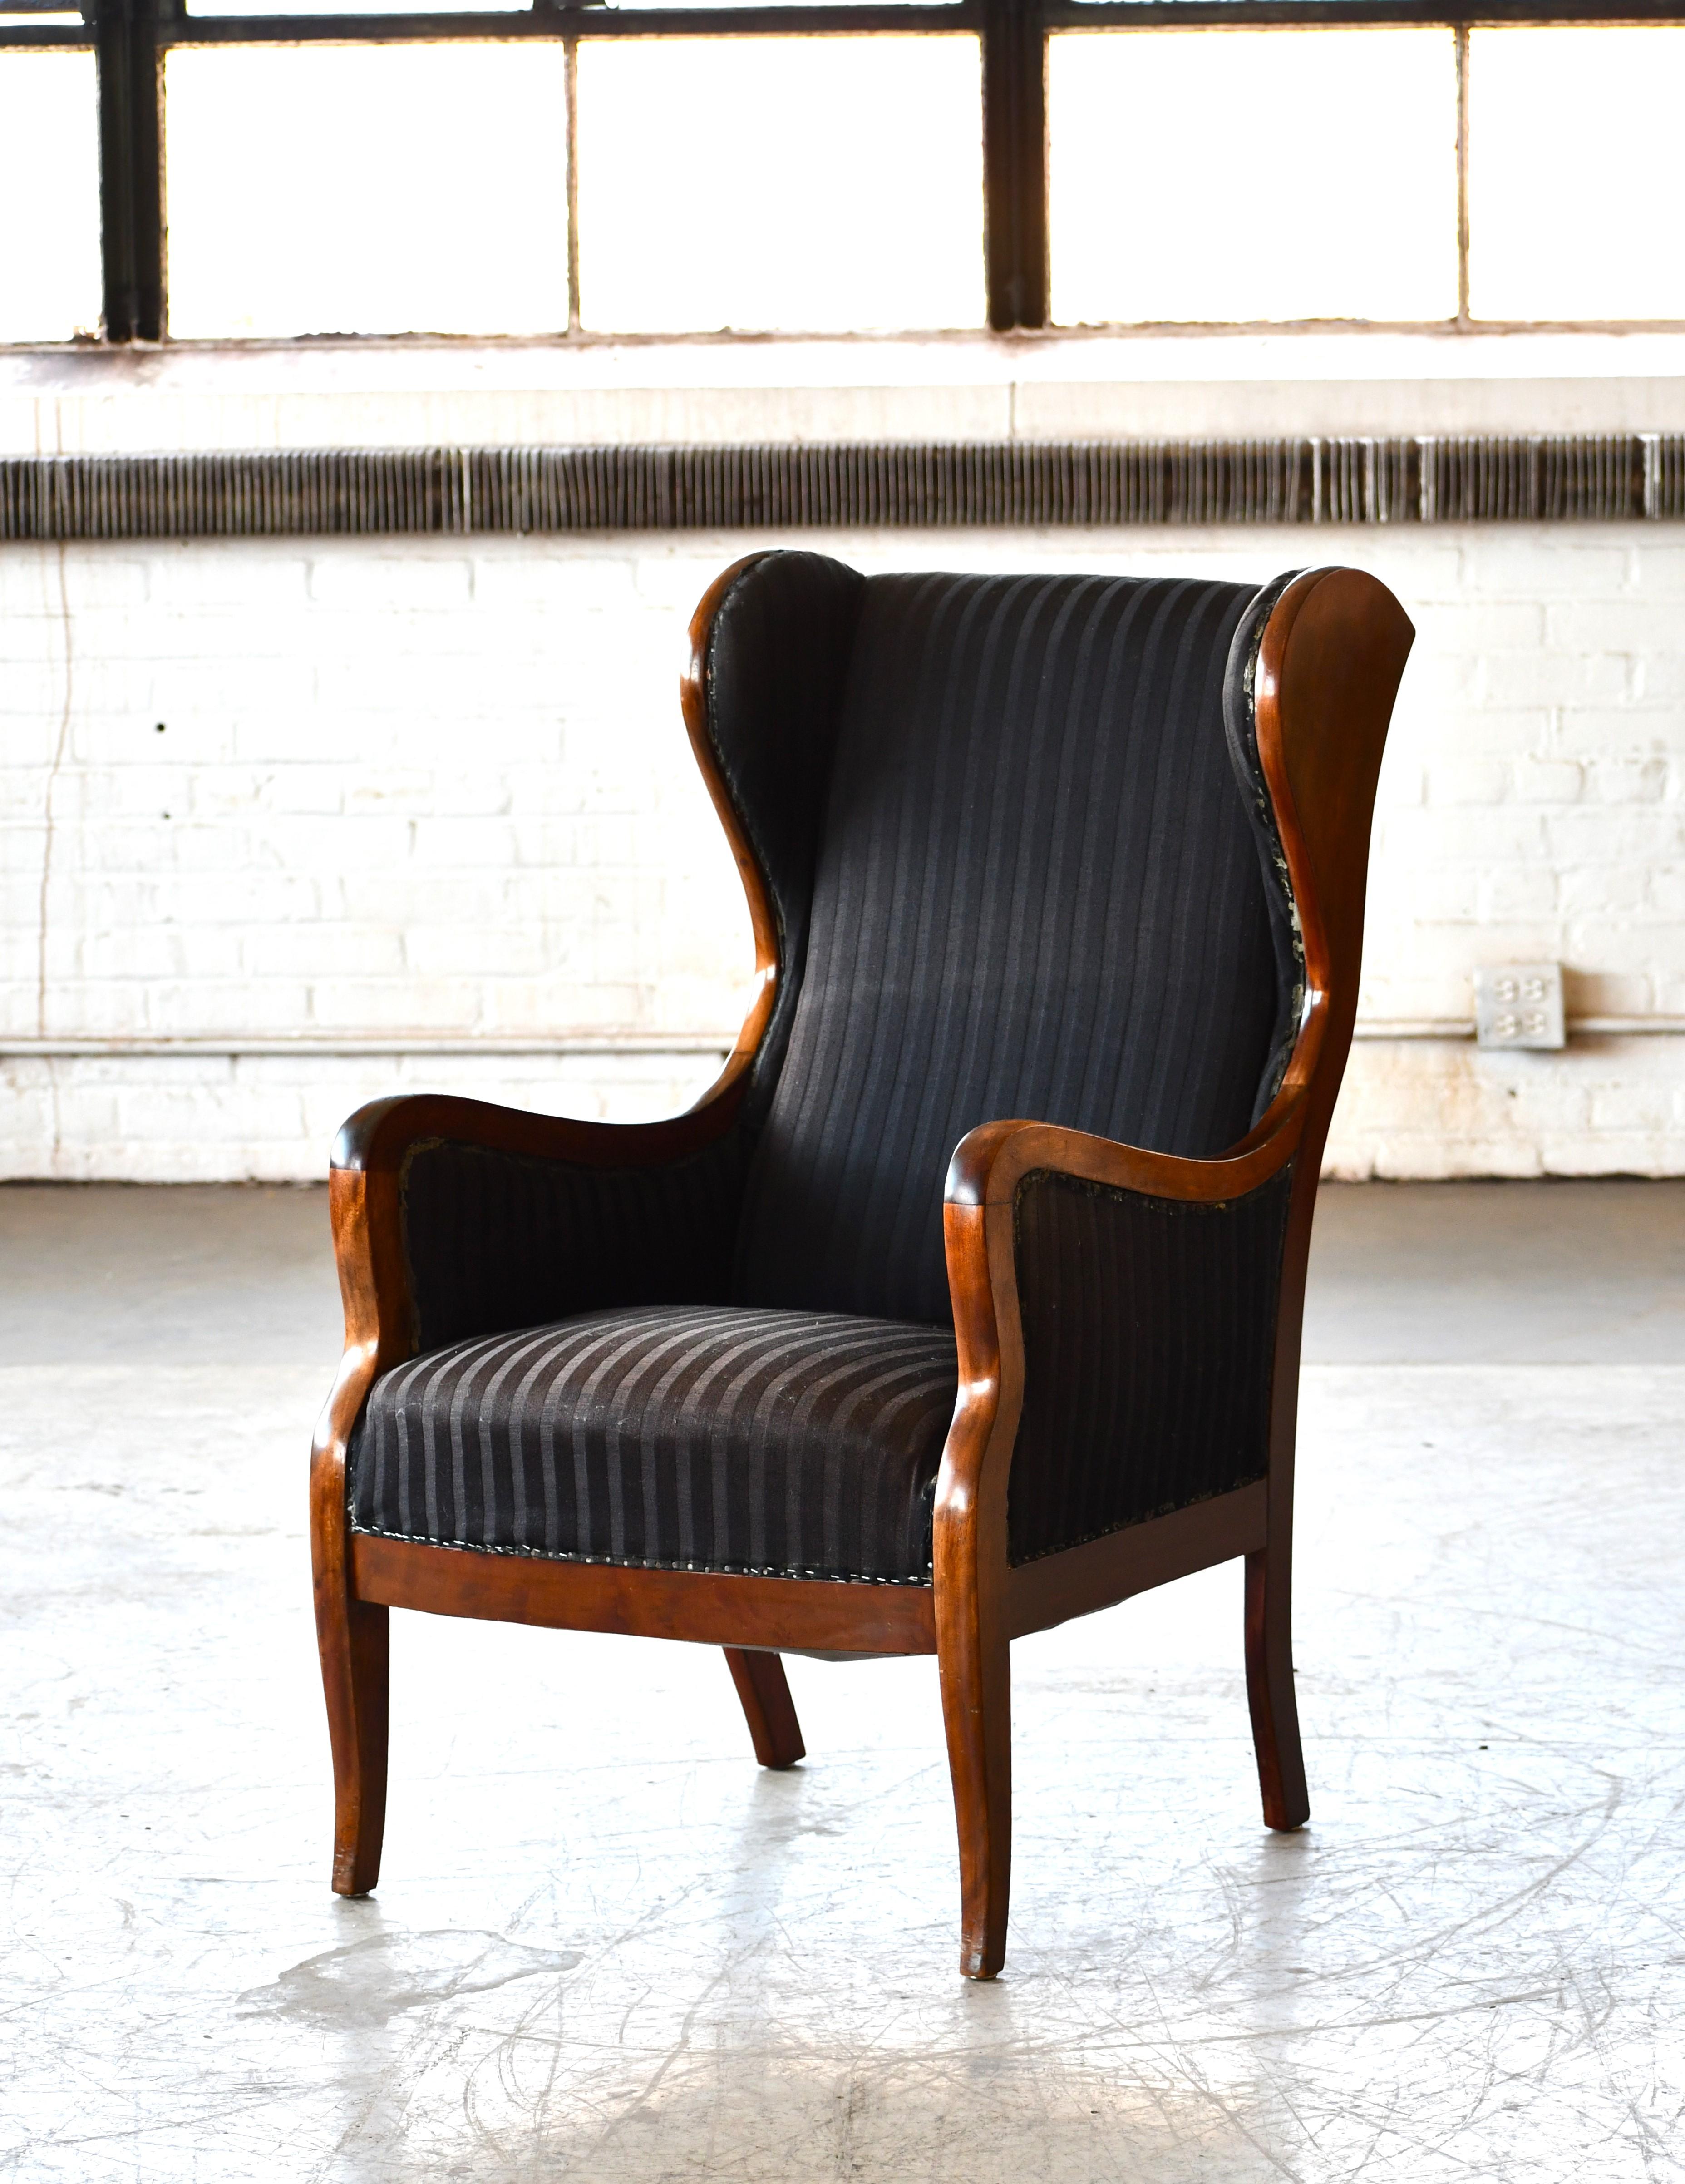 Beautiful classic 1930s-1940s wingback chair produced by Master Cabinetmaker Frits Henningsen, Denmark. Slid mahogany stained beechwood. Very elegant design that fits superbly into any modern design making a strong yet refined statement. Overall